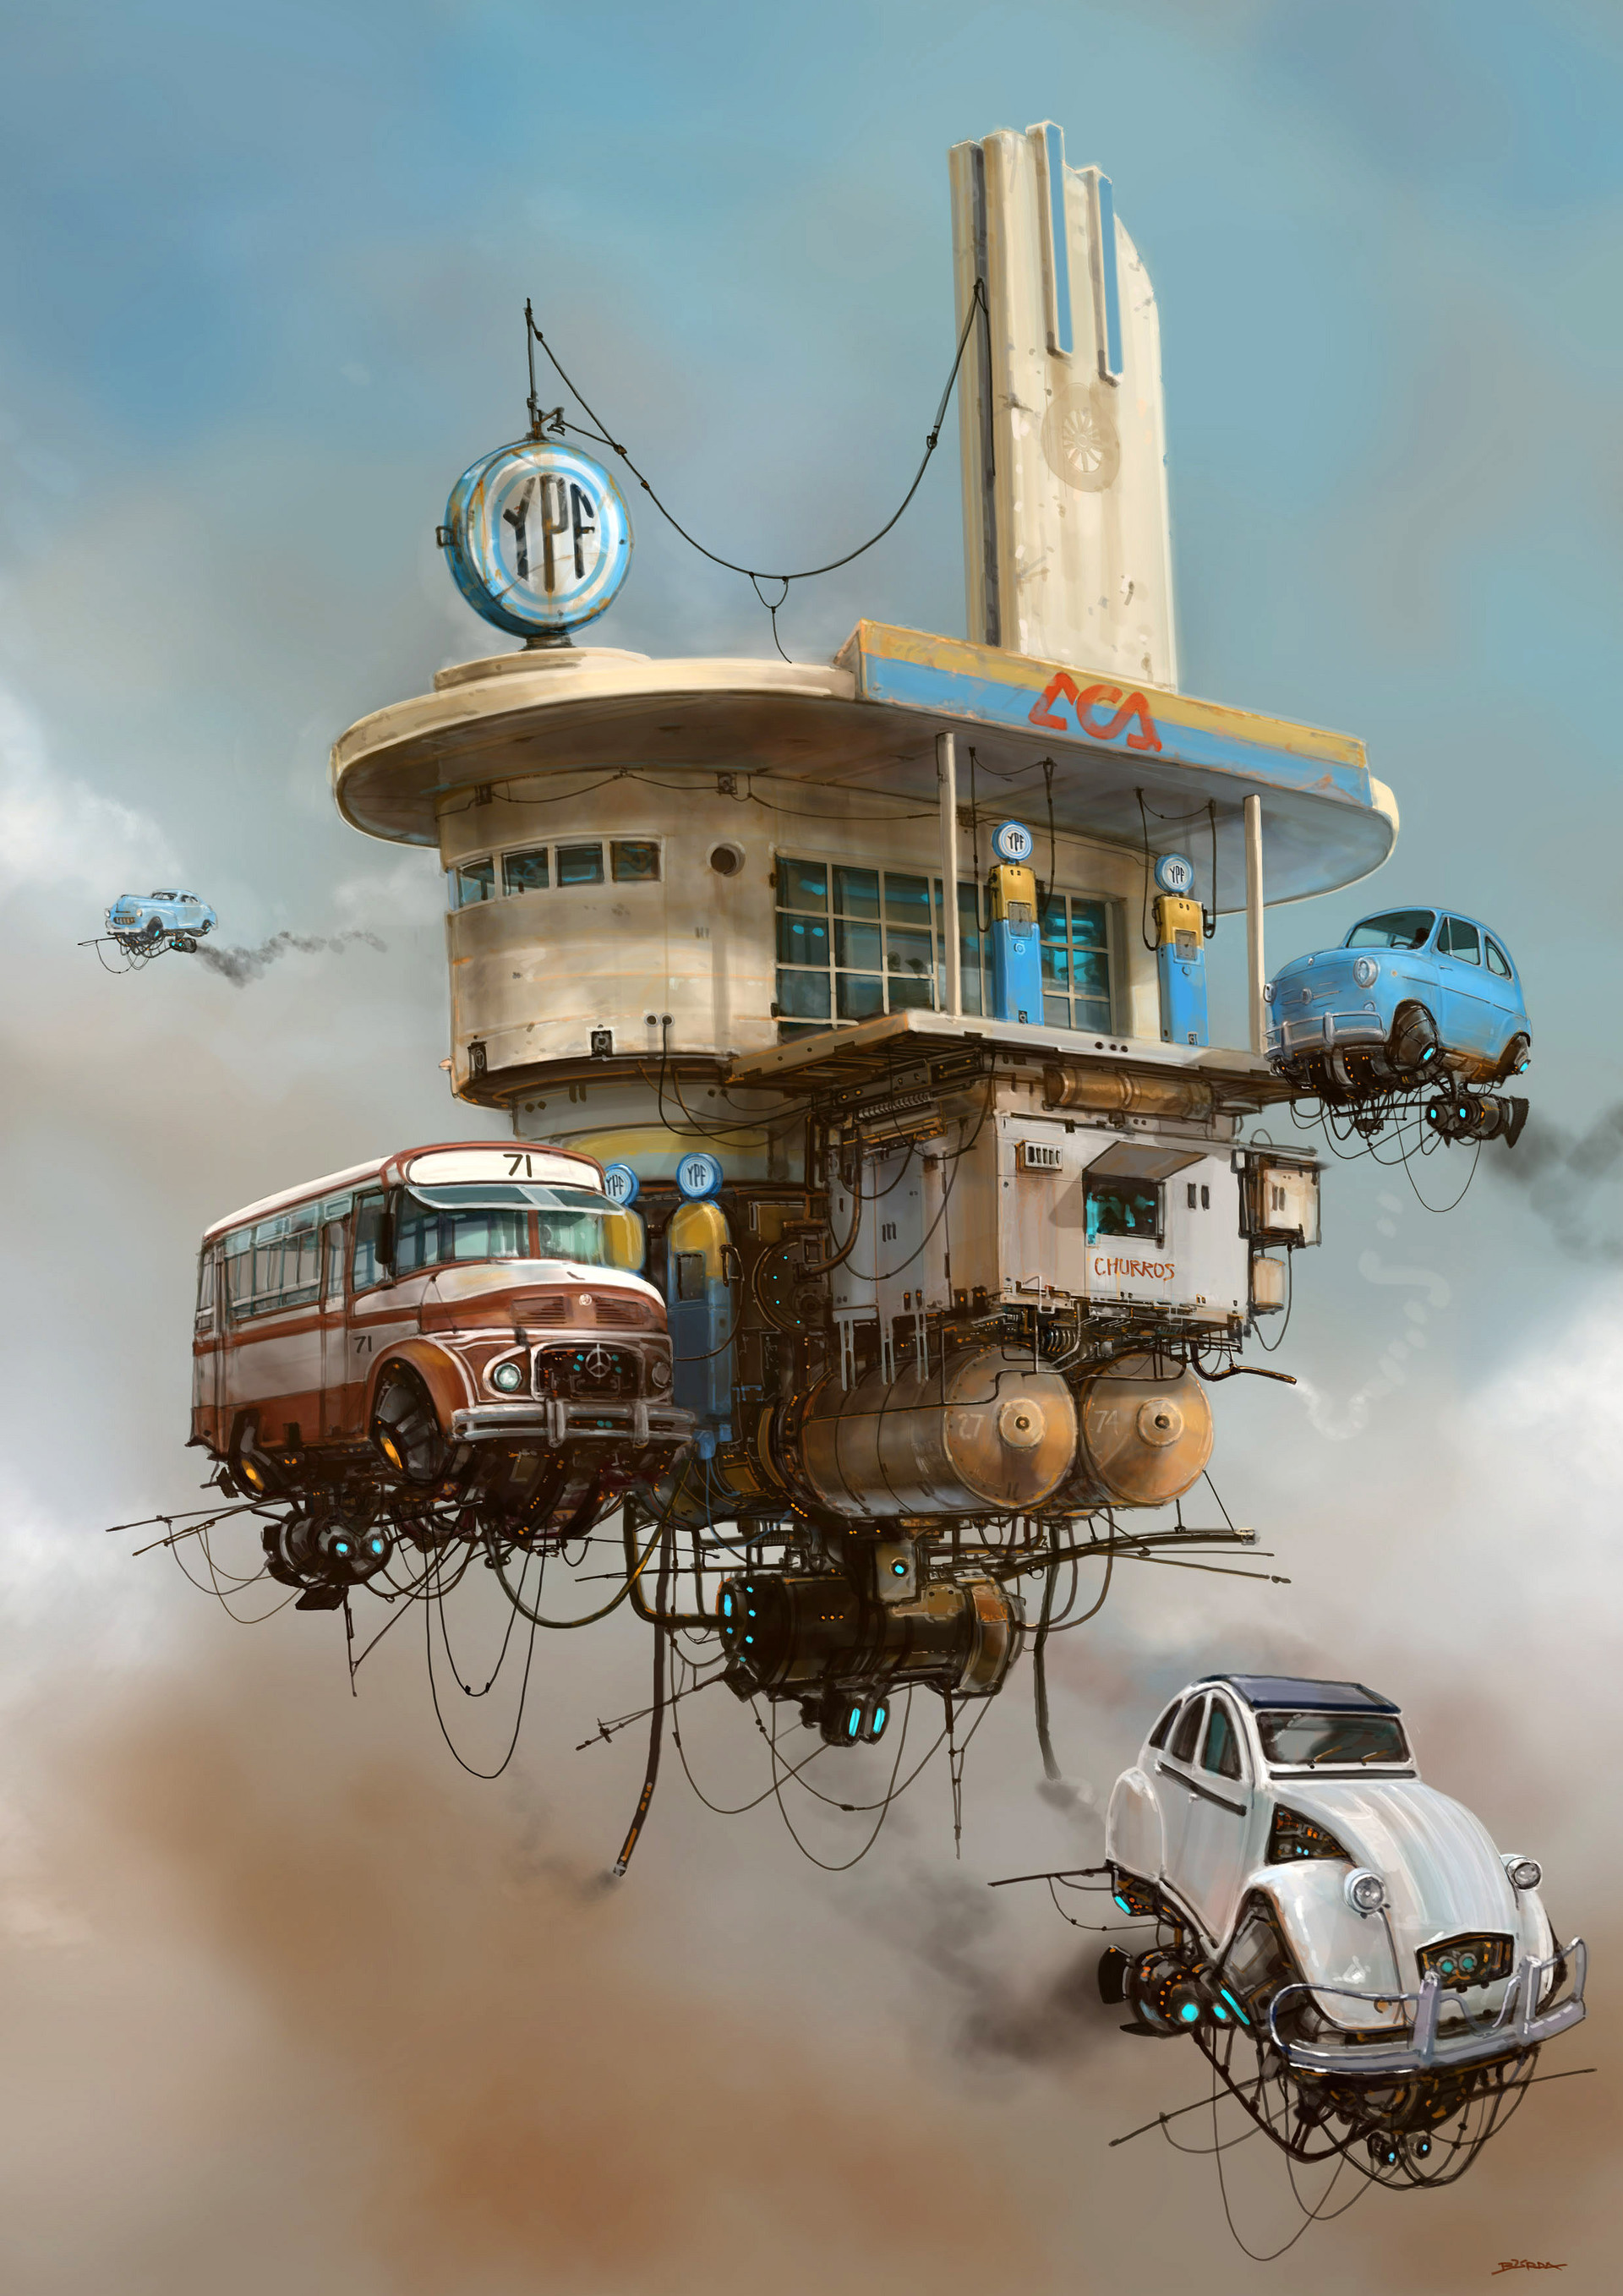 sci fi, auto, art, ssi fi, fiction, that's incredible, sky, building